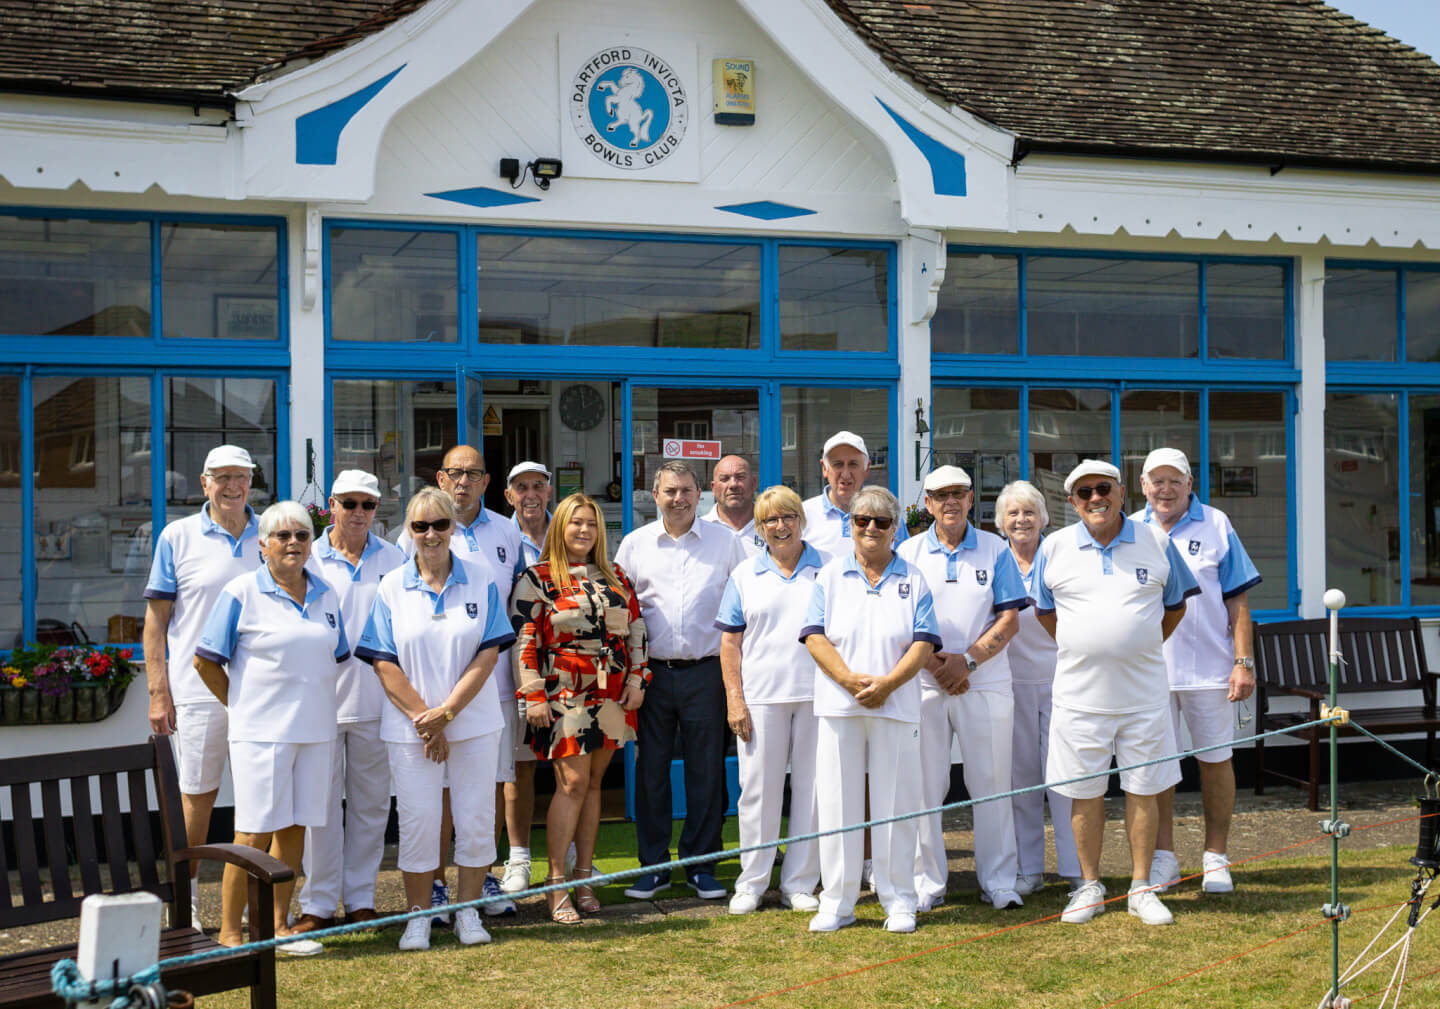 Dartford bowls club members standing infant of their club with the local MP and Social Value Manager for Breyer Group